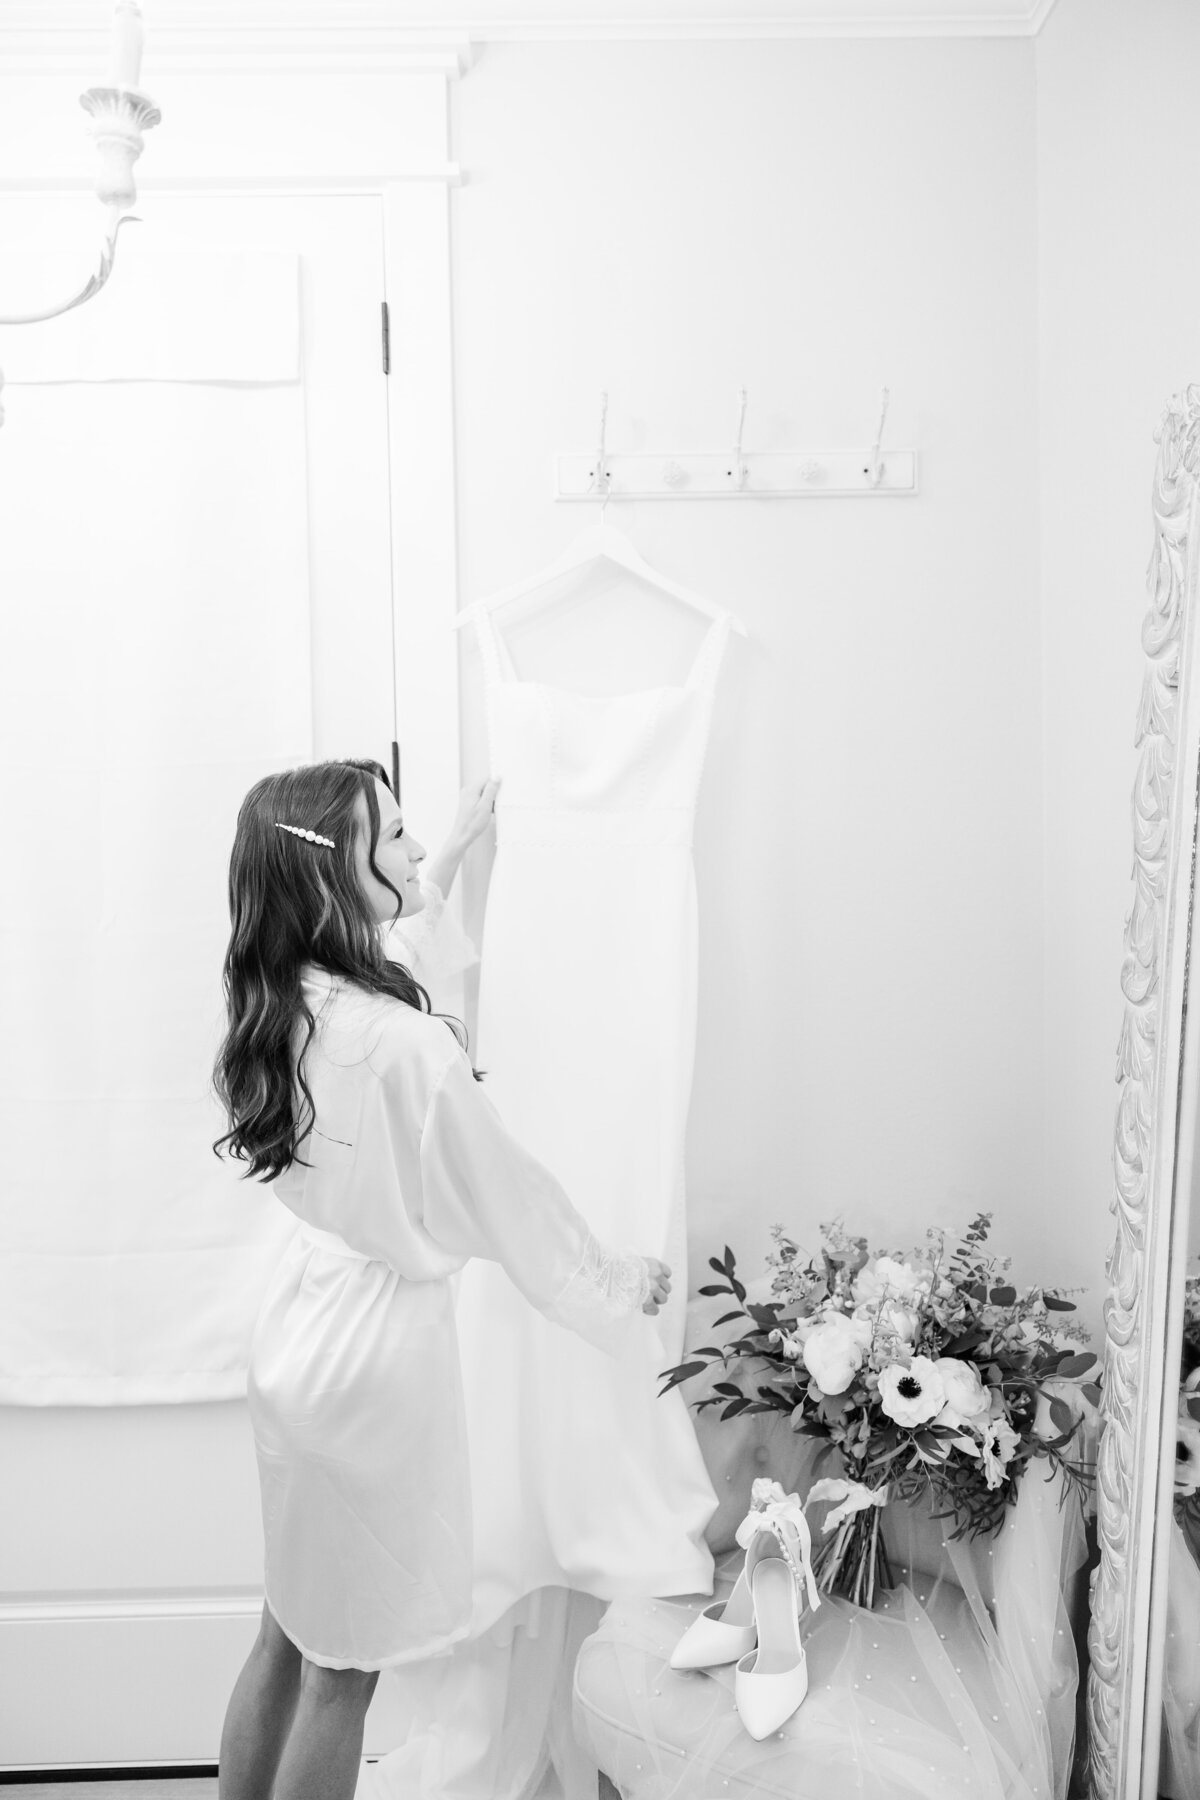 A artistic black and white image of a bride standing with her wedding dress as she looks at it hanging on the wall.